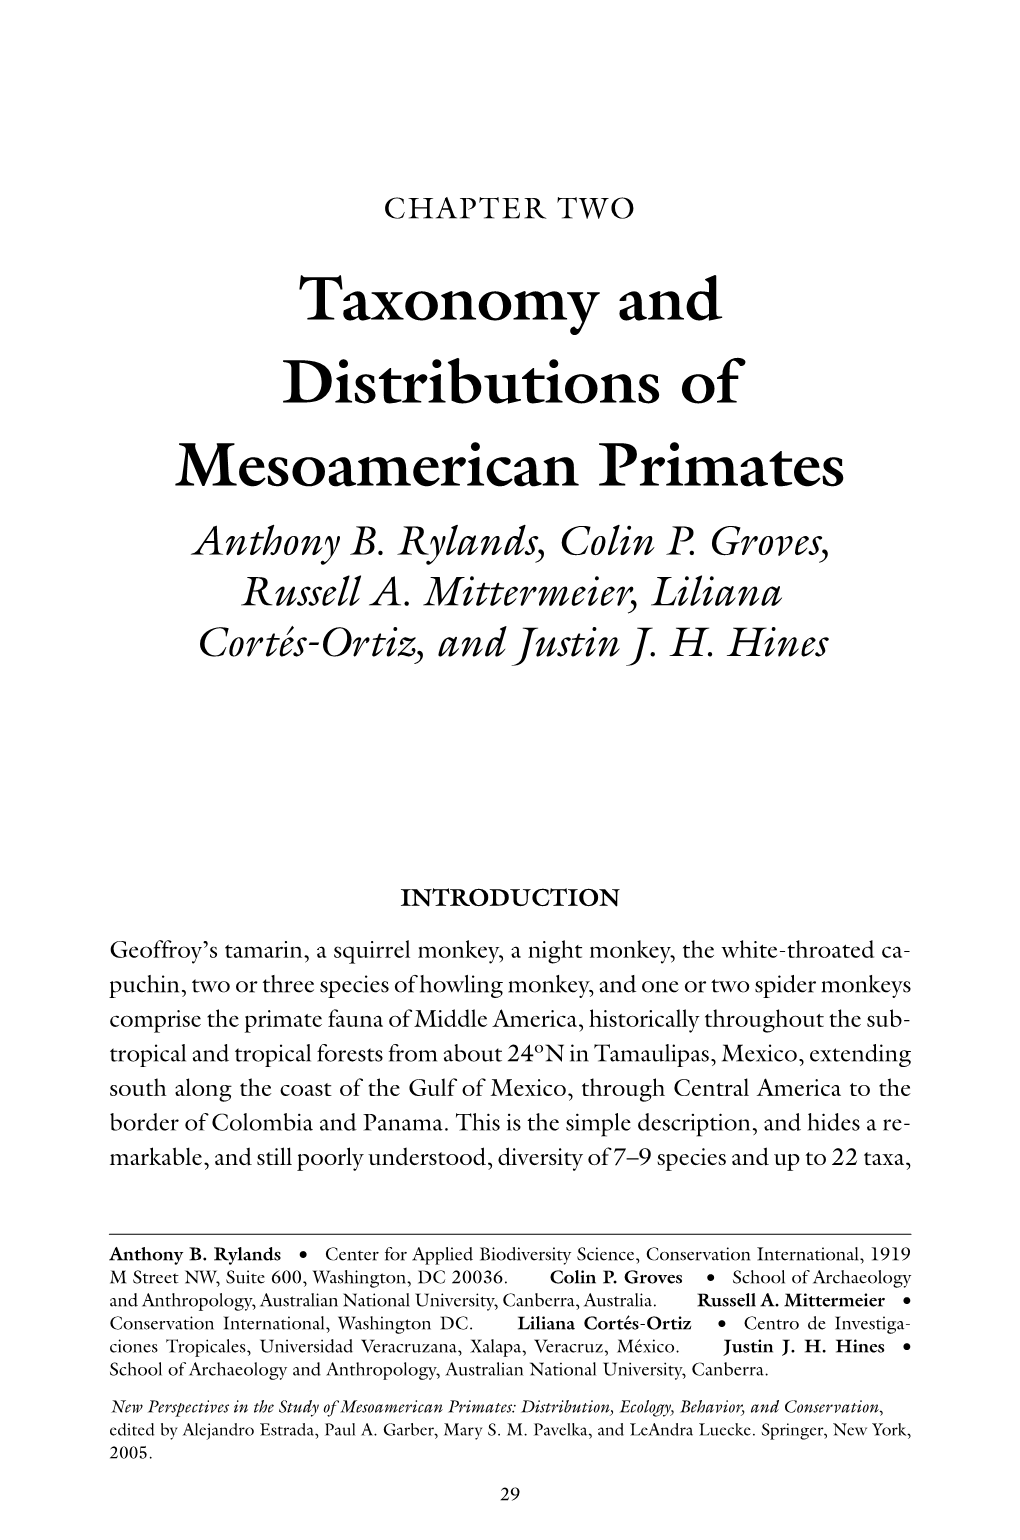 Taxonomy and Distributions of Mesoamerican Primates Anthony B